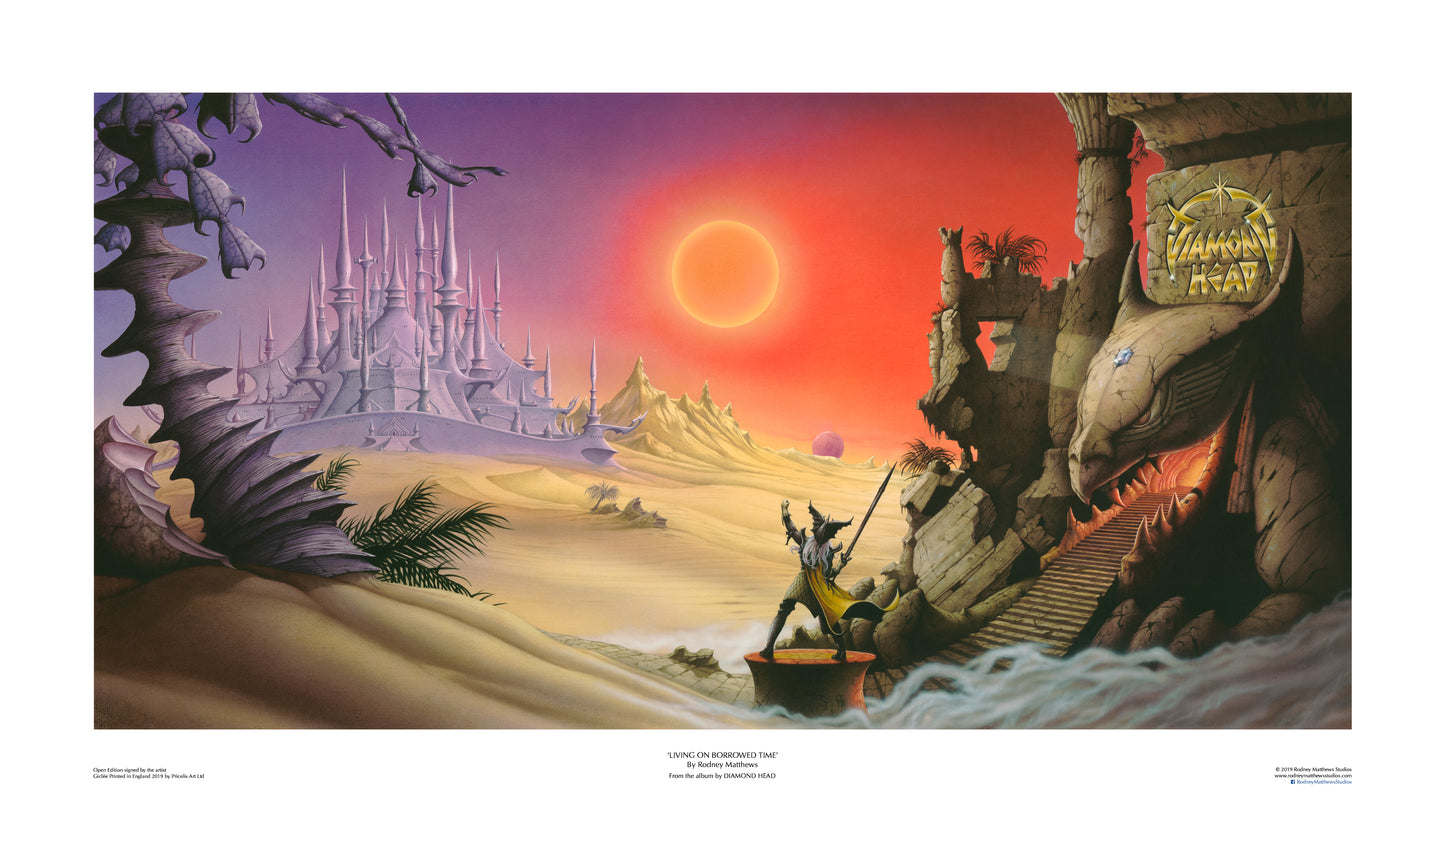 Living on Borrowed Time open edition print by Rodney Matthews